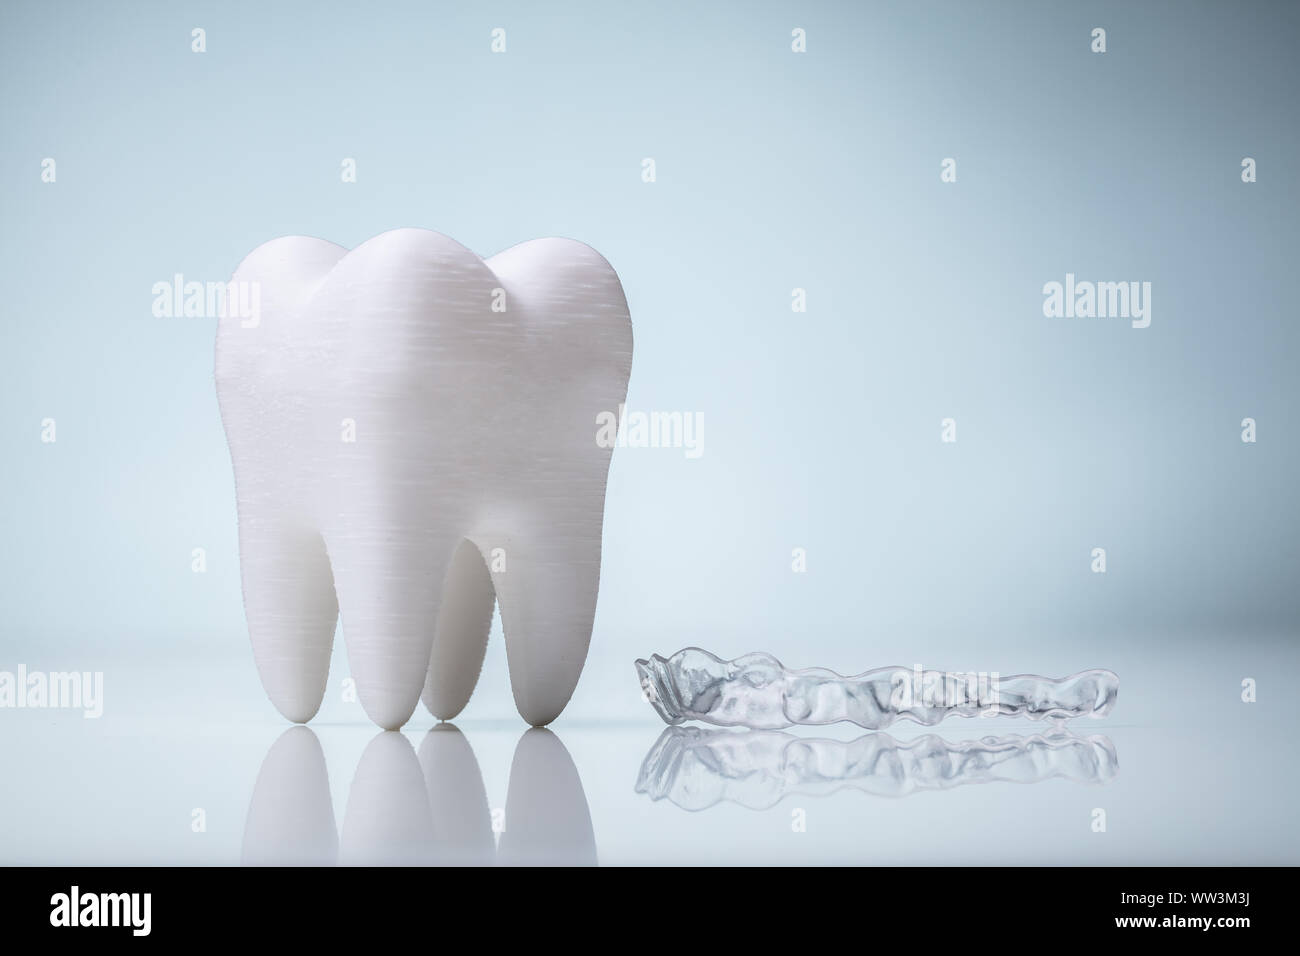 White Ceramic Tooth Model And Transparent Mouth Guard Over Reflective Desk Stock Photo